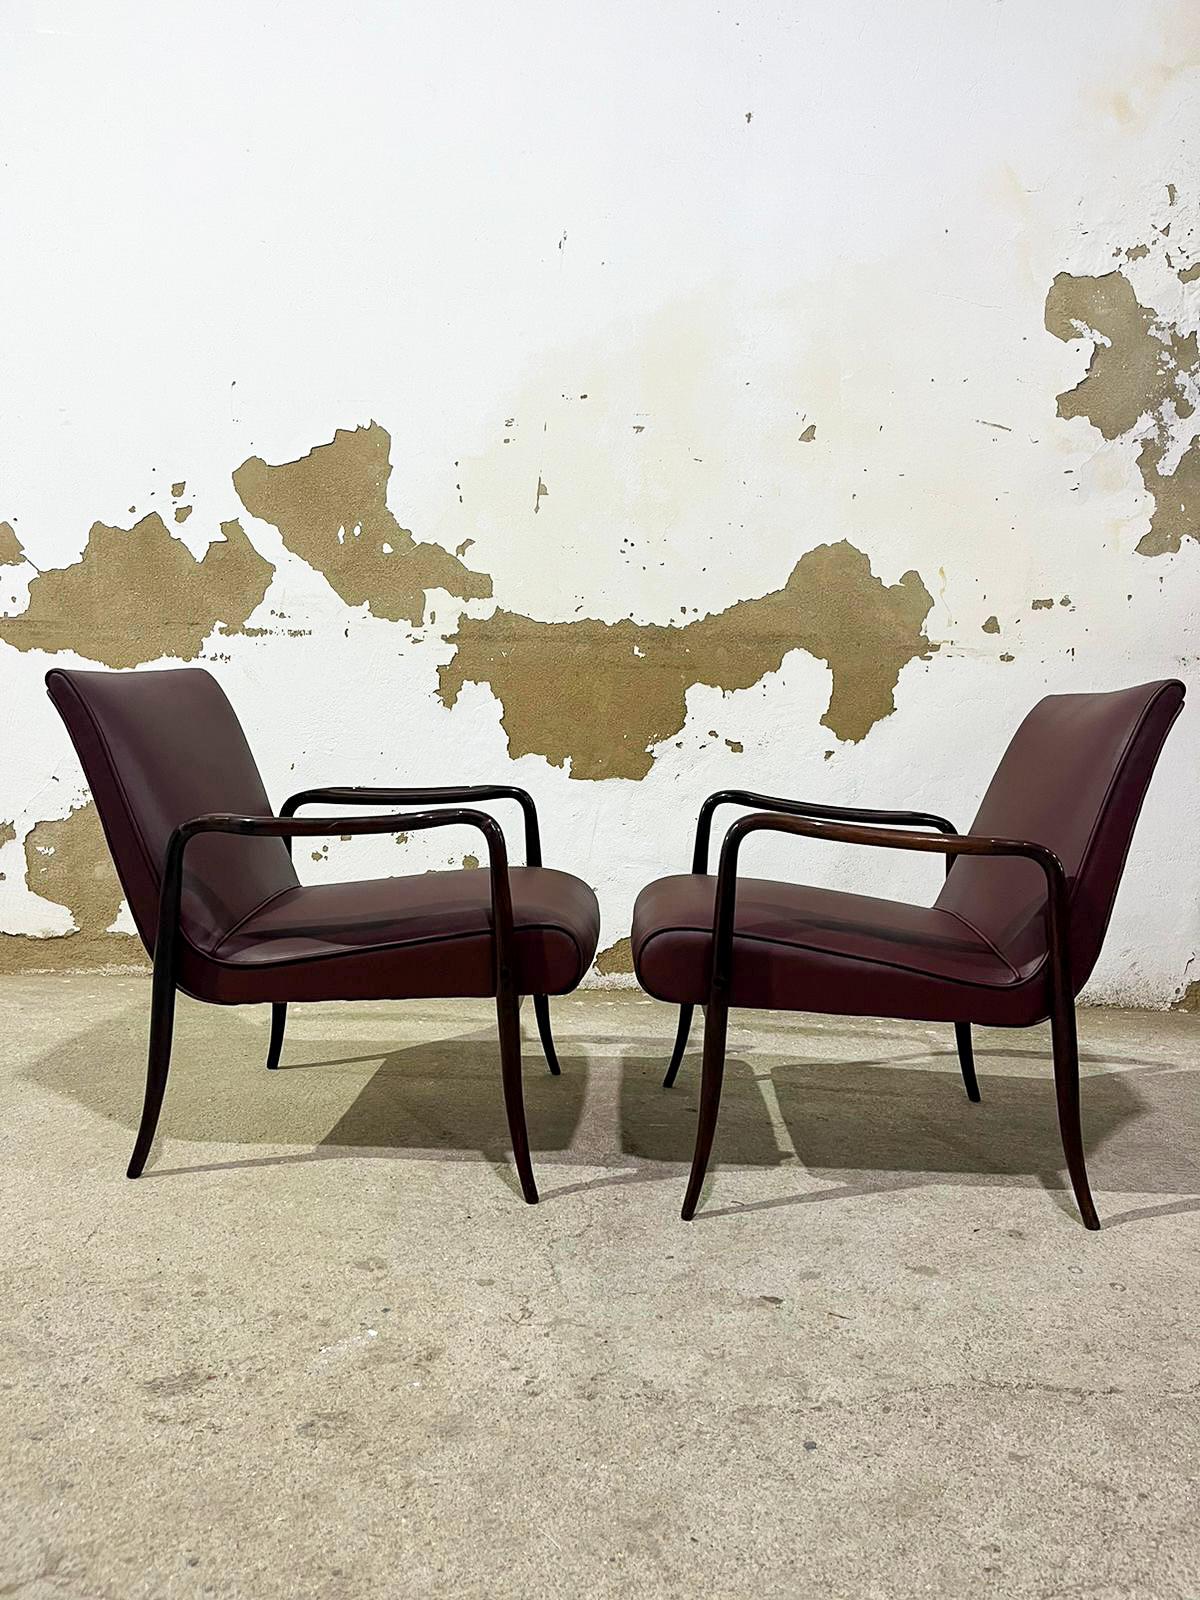 20th Century Pair of “Leve” armchairs in hardwood & leather by Joaquim Tenreiro, 1942, Brazil For Sale